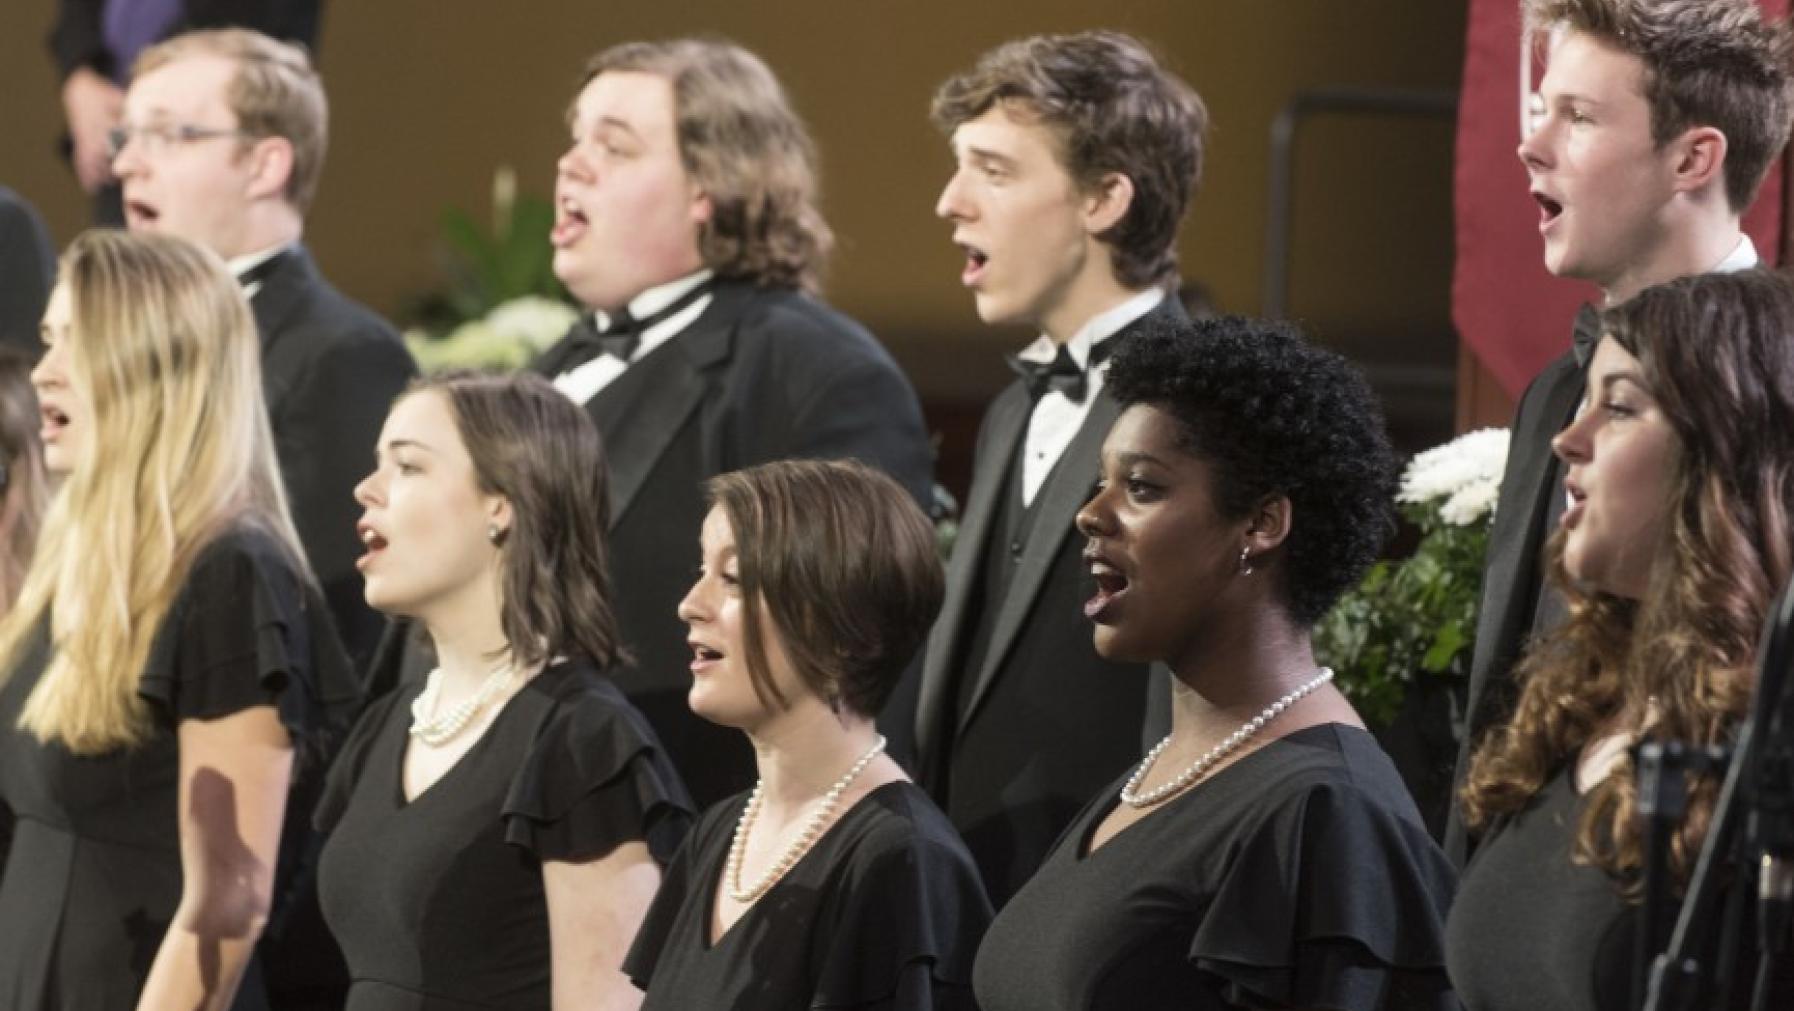 Adelphians sing during the Installation Ceremony. Photo by Ross Mulhausen.